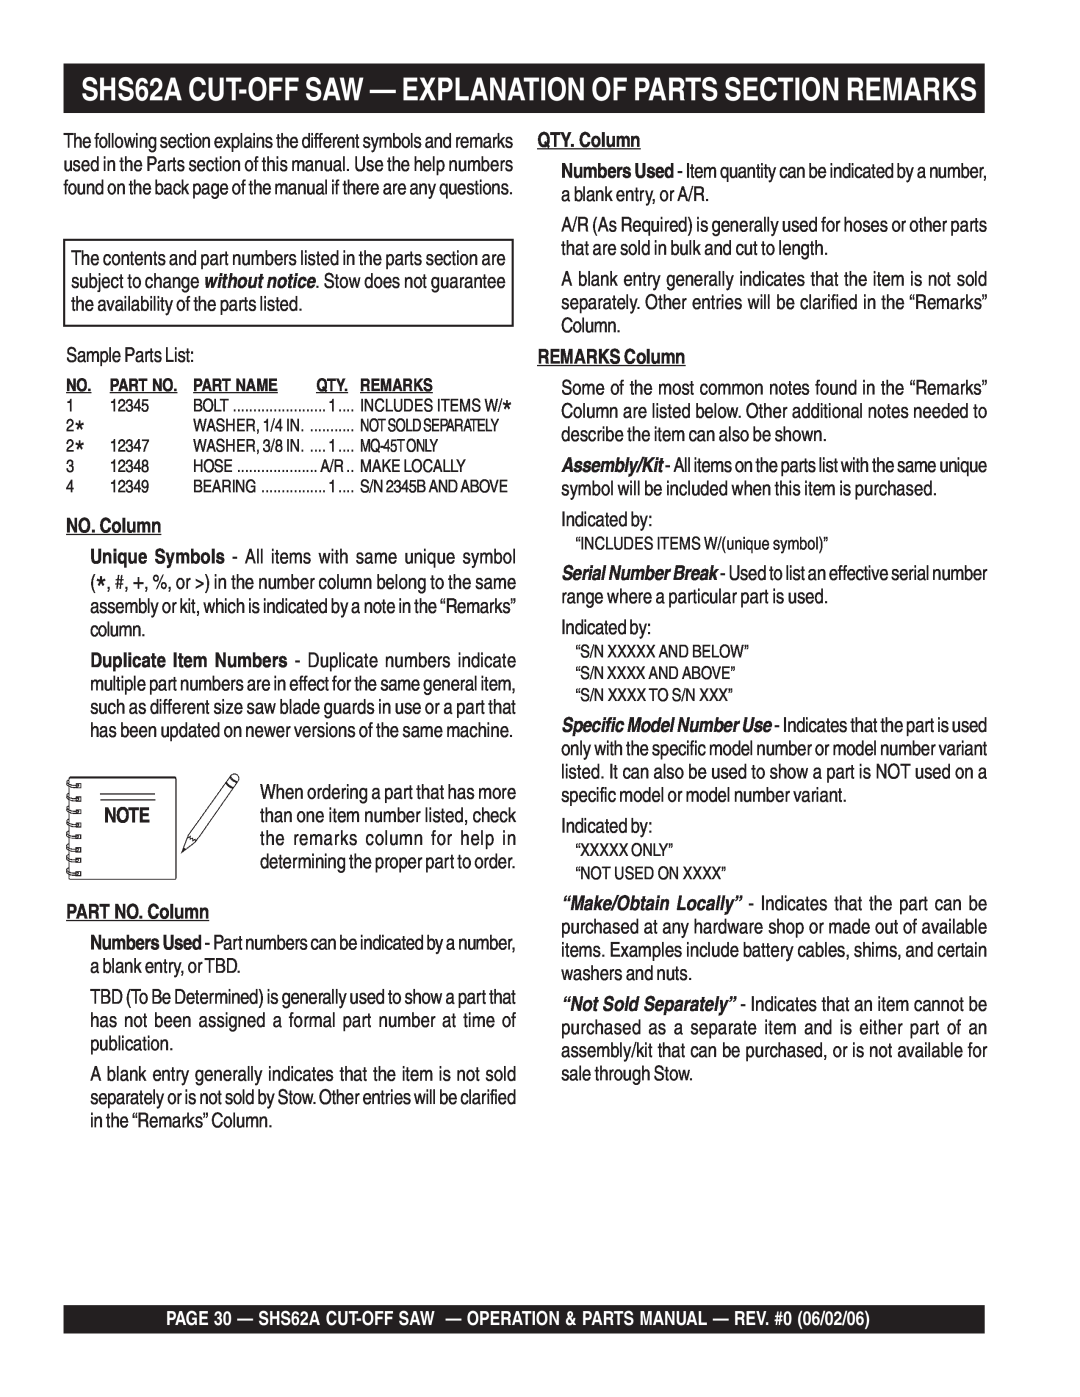 Stow manual SHS62A CUT-OFF SAW - EXPLANATION OF PARTS SECTION REMARKS, PART NO. Column, QTY. Column, REMARKS Column 